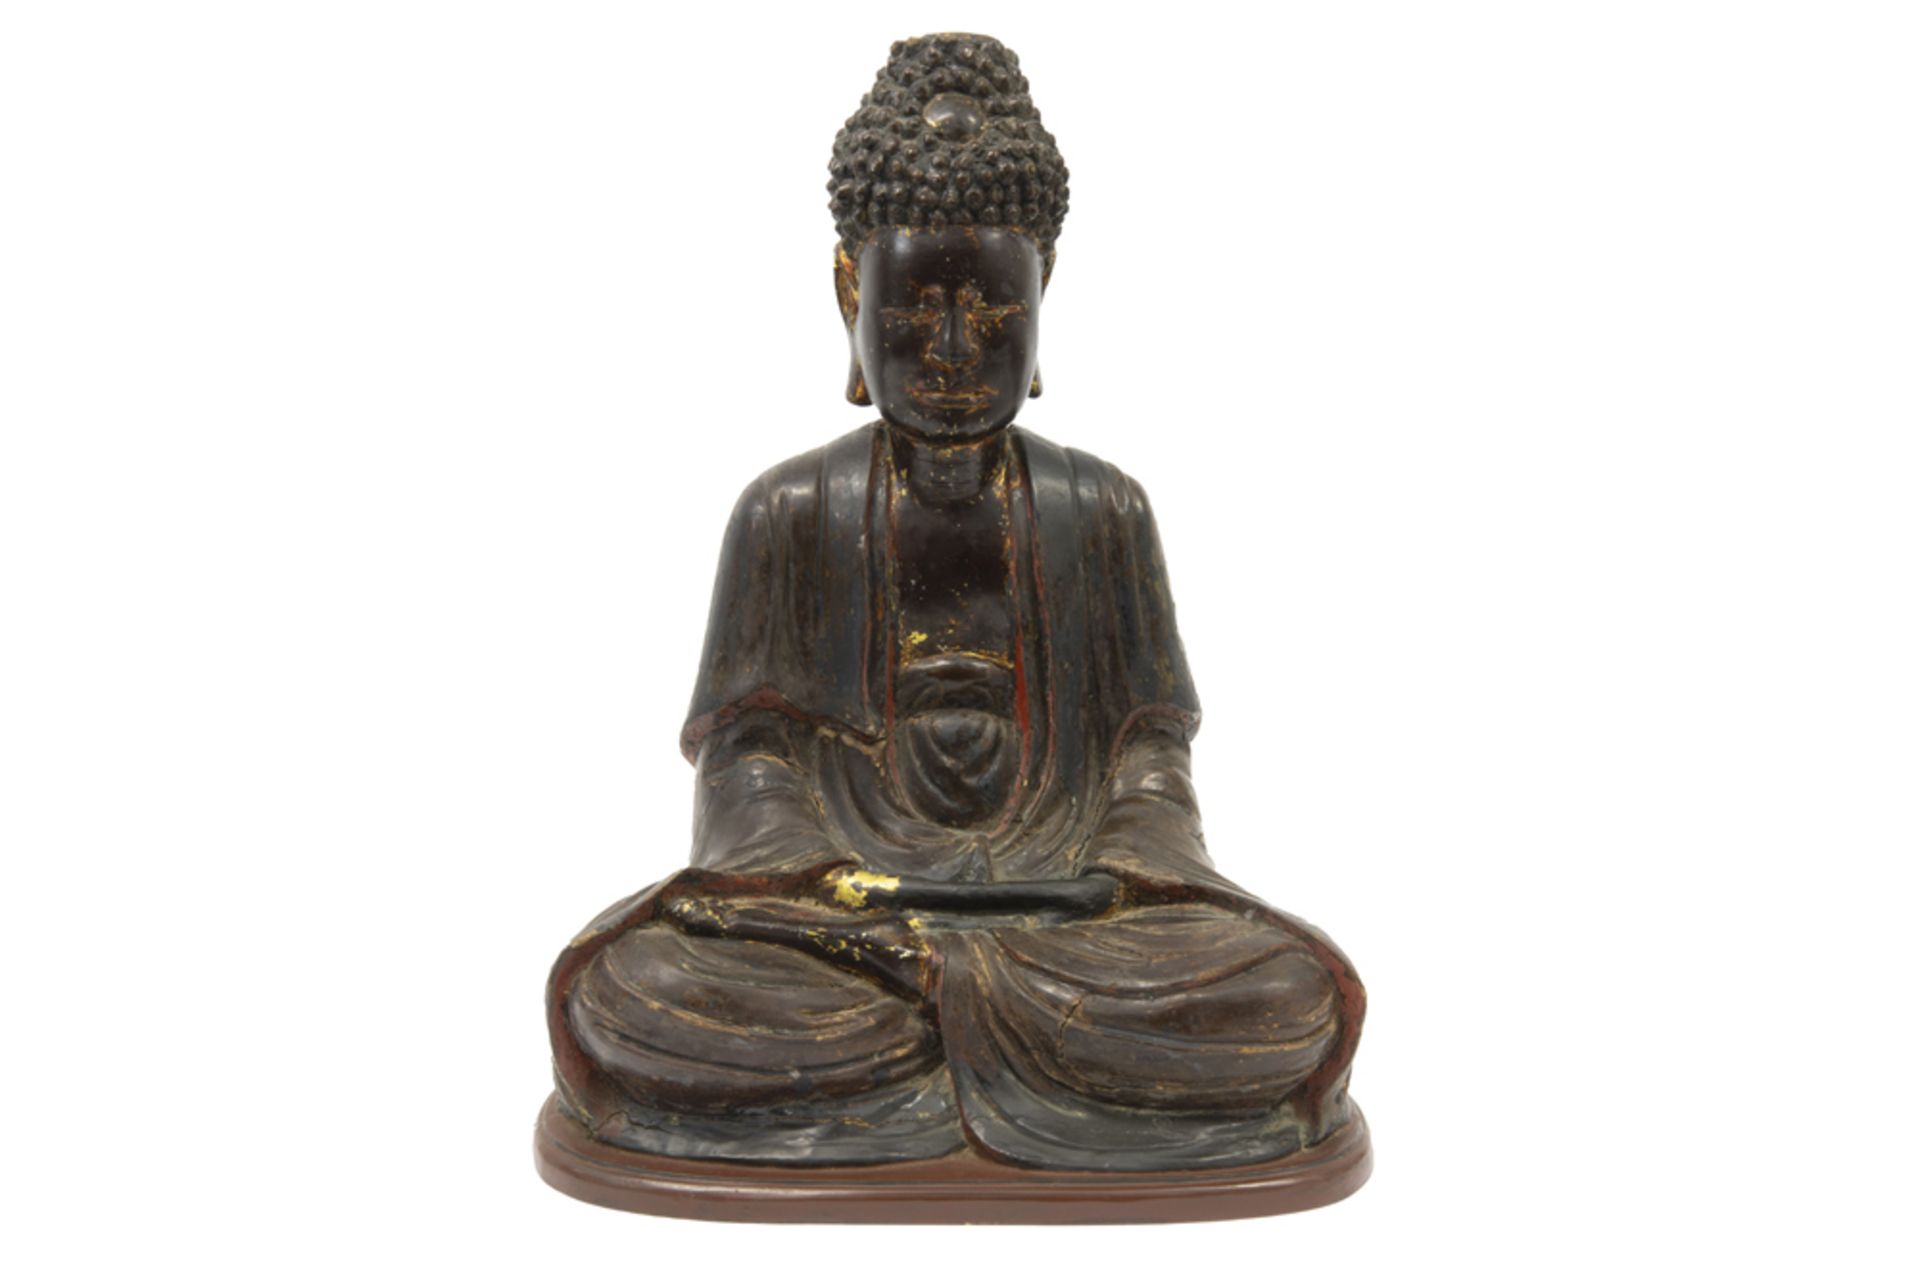 19th Cent. Vietnamese "Buddha" sculpture in lacquered teak wood with remains of gilding || VIETNAM -